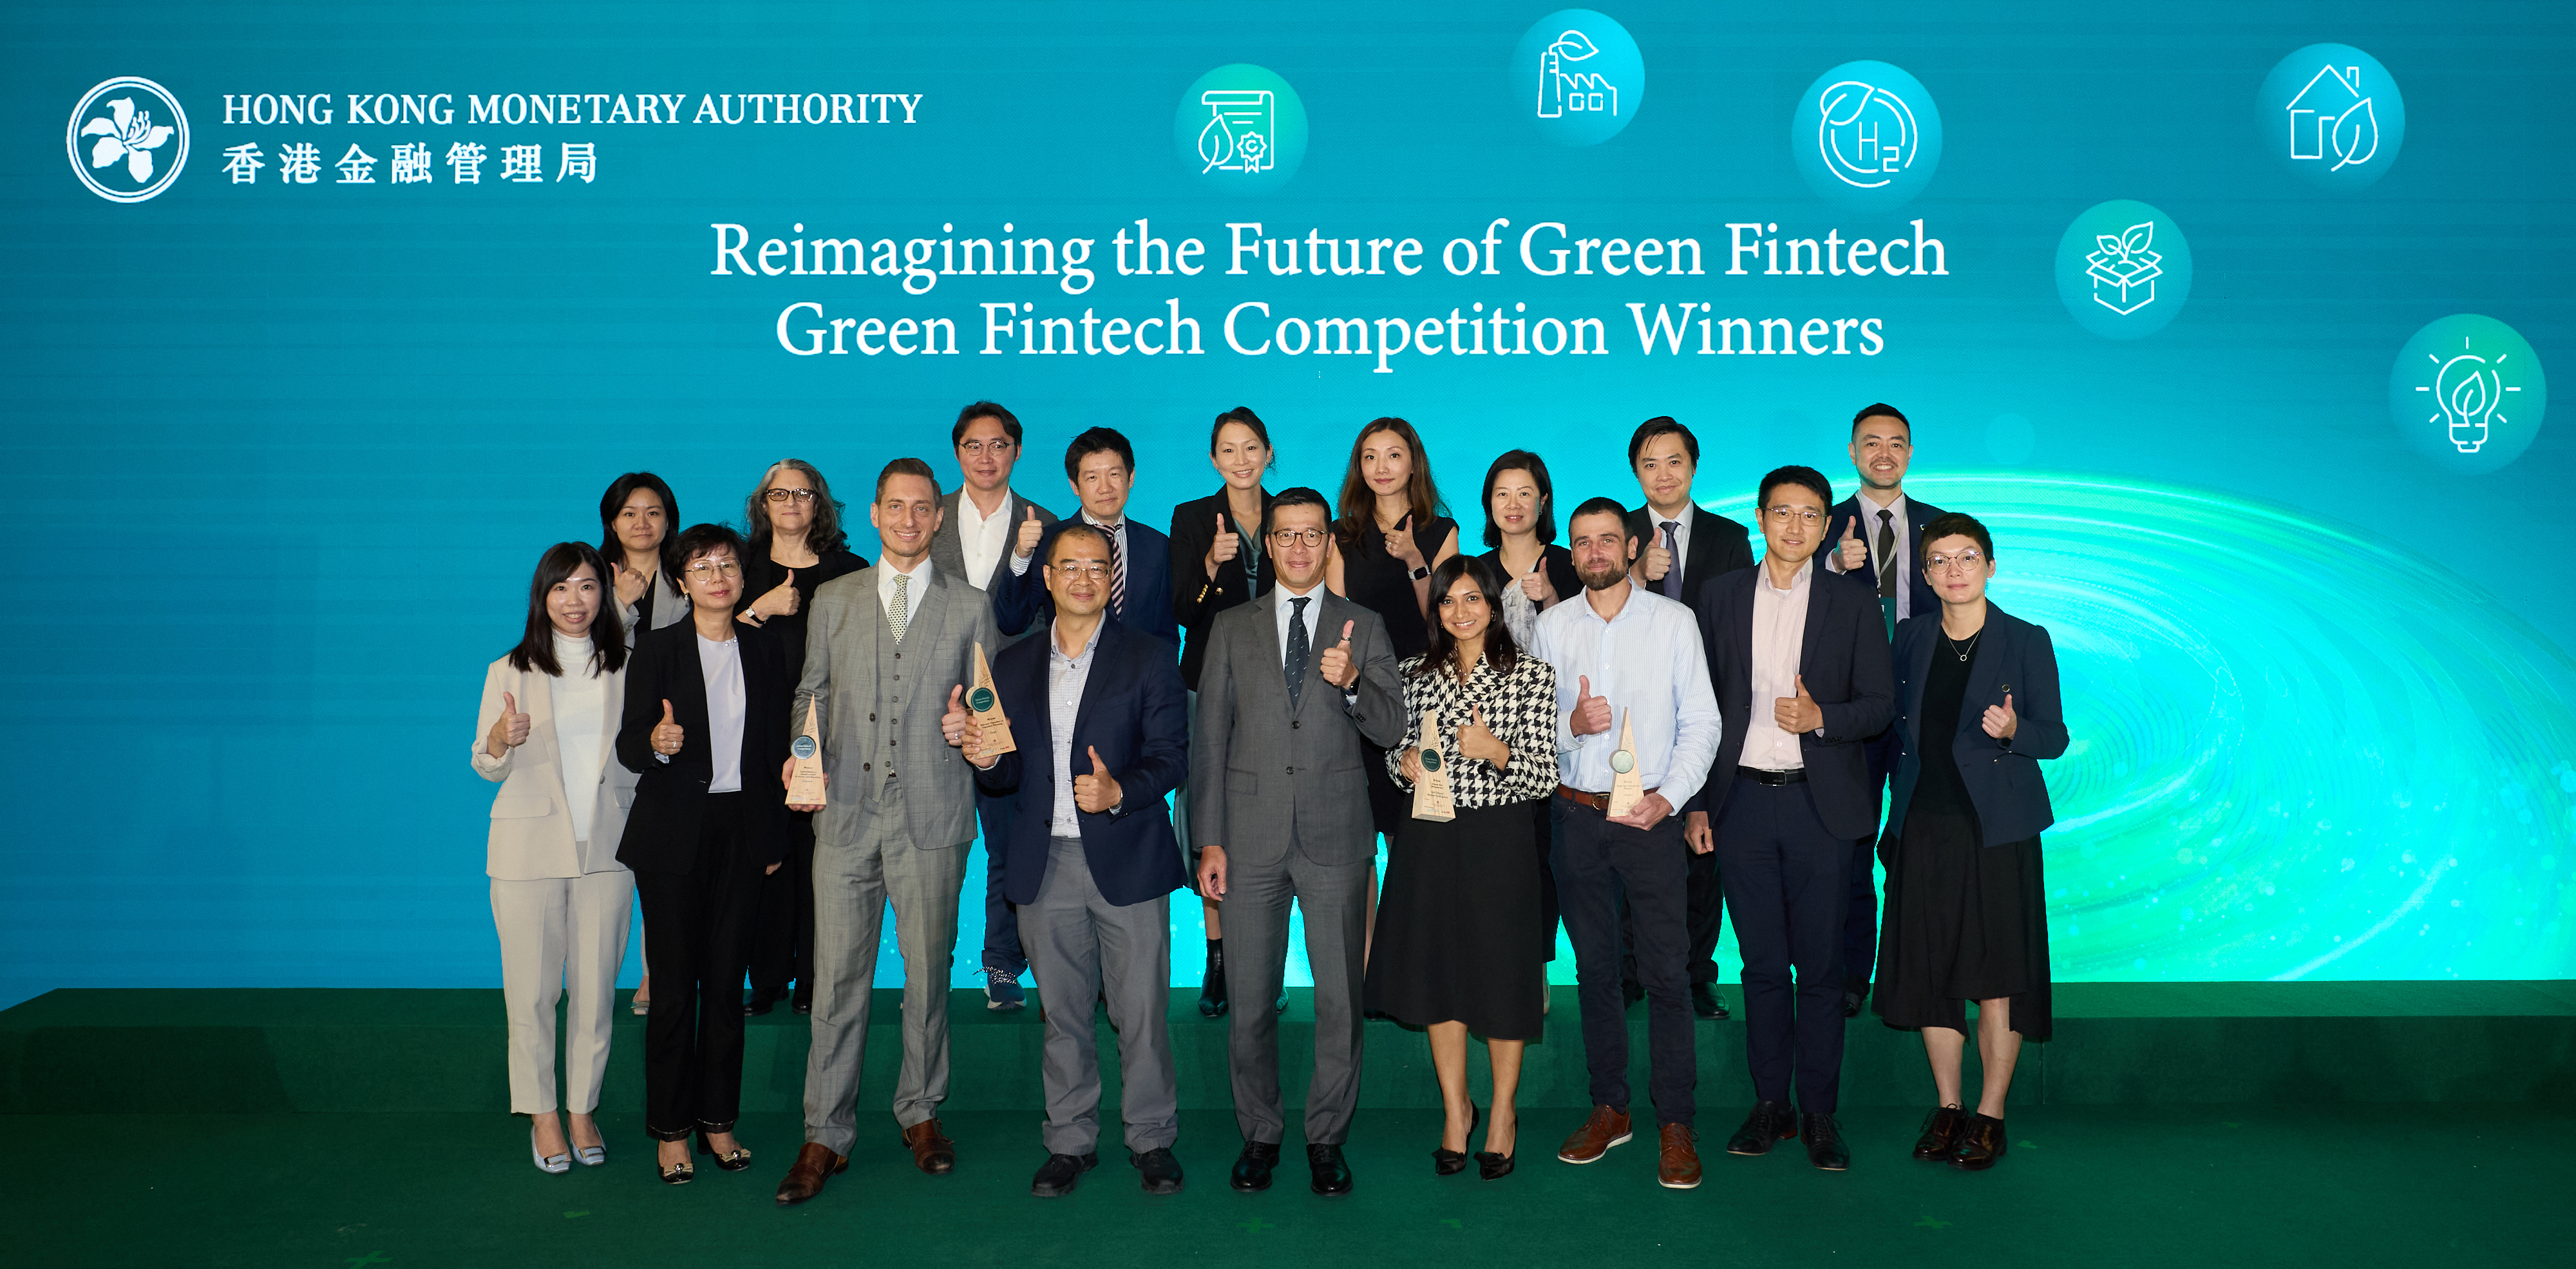 Mr Donald Chen, Executive Director (Banking Policy) of the HKMA (front row, centre), presents the awards to the winners of the Green Fintech Competition at the Green and Sustainable Banking Conference. The photo shows Mr Chen, the winners and the judging panel. 